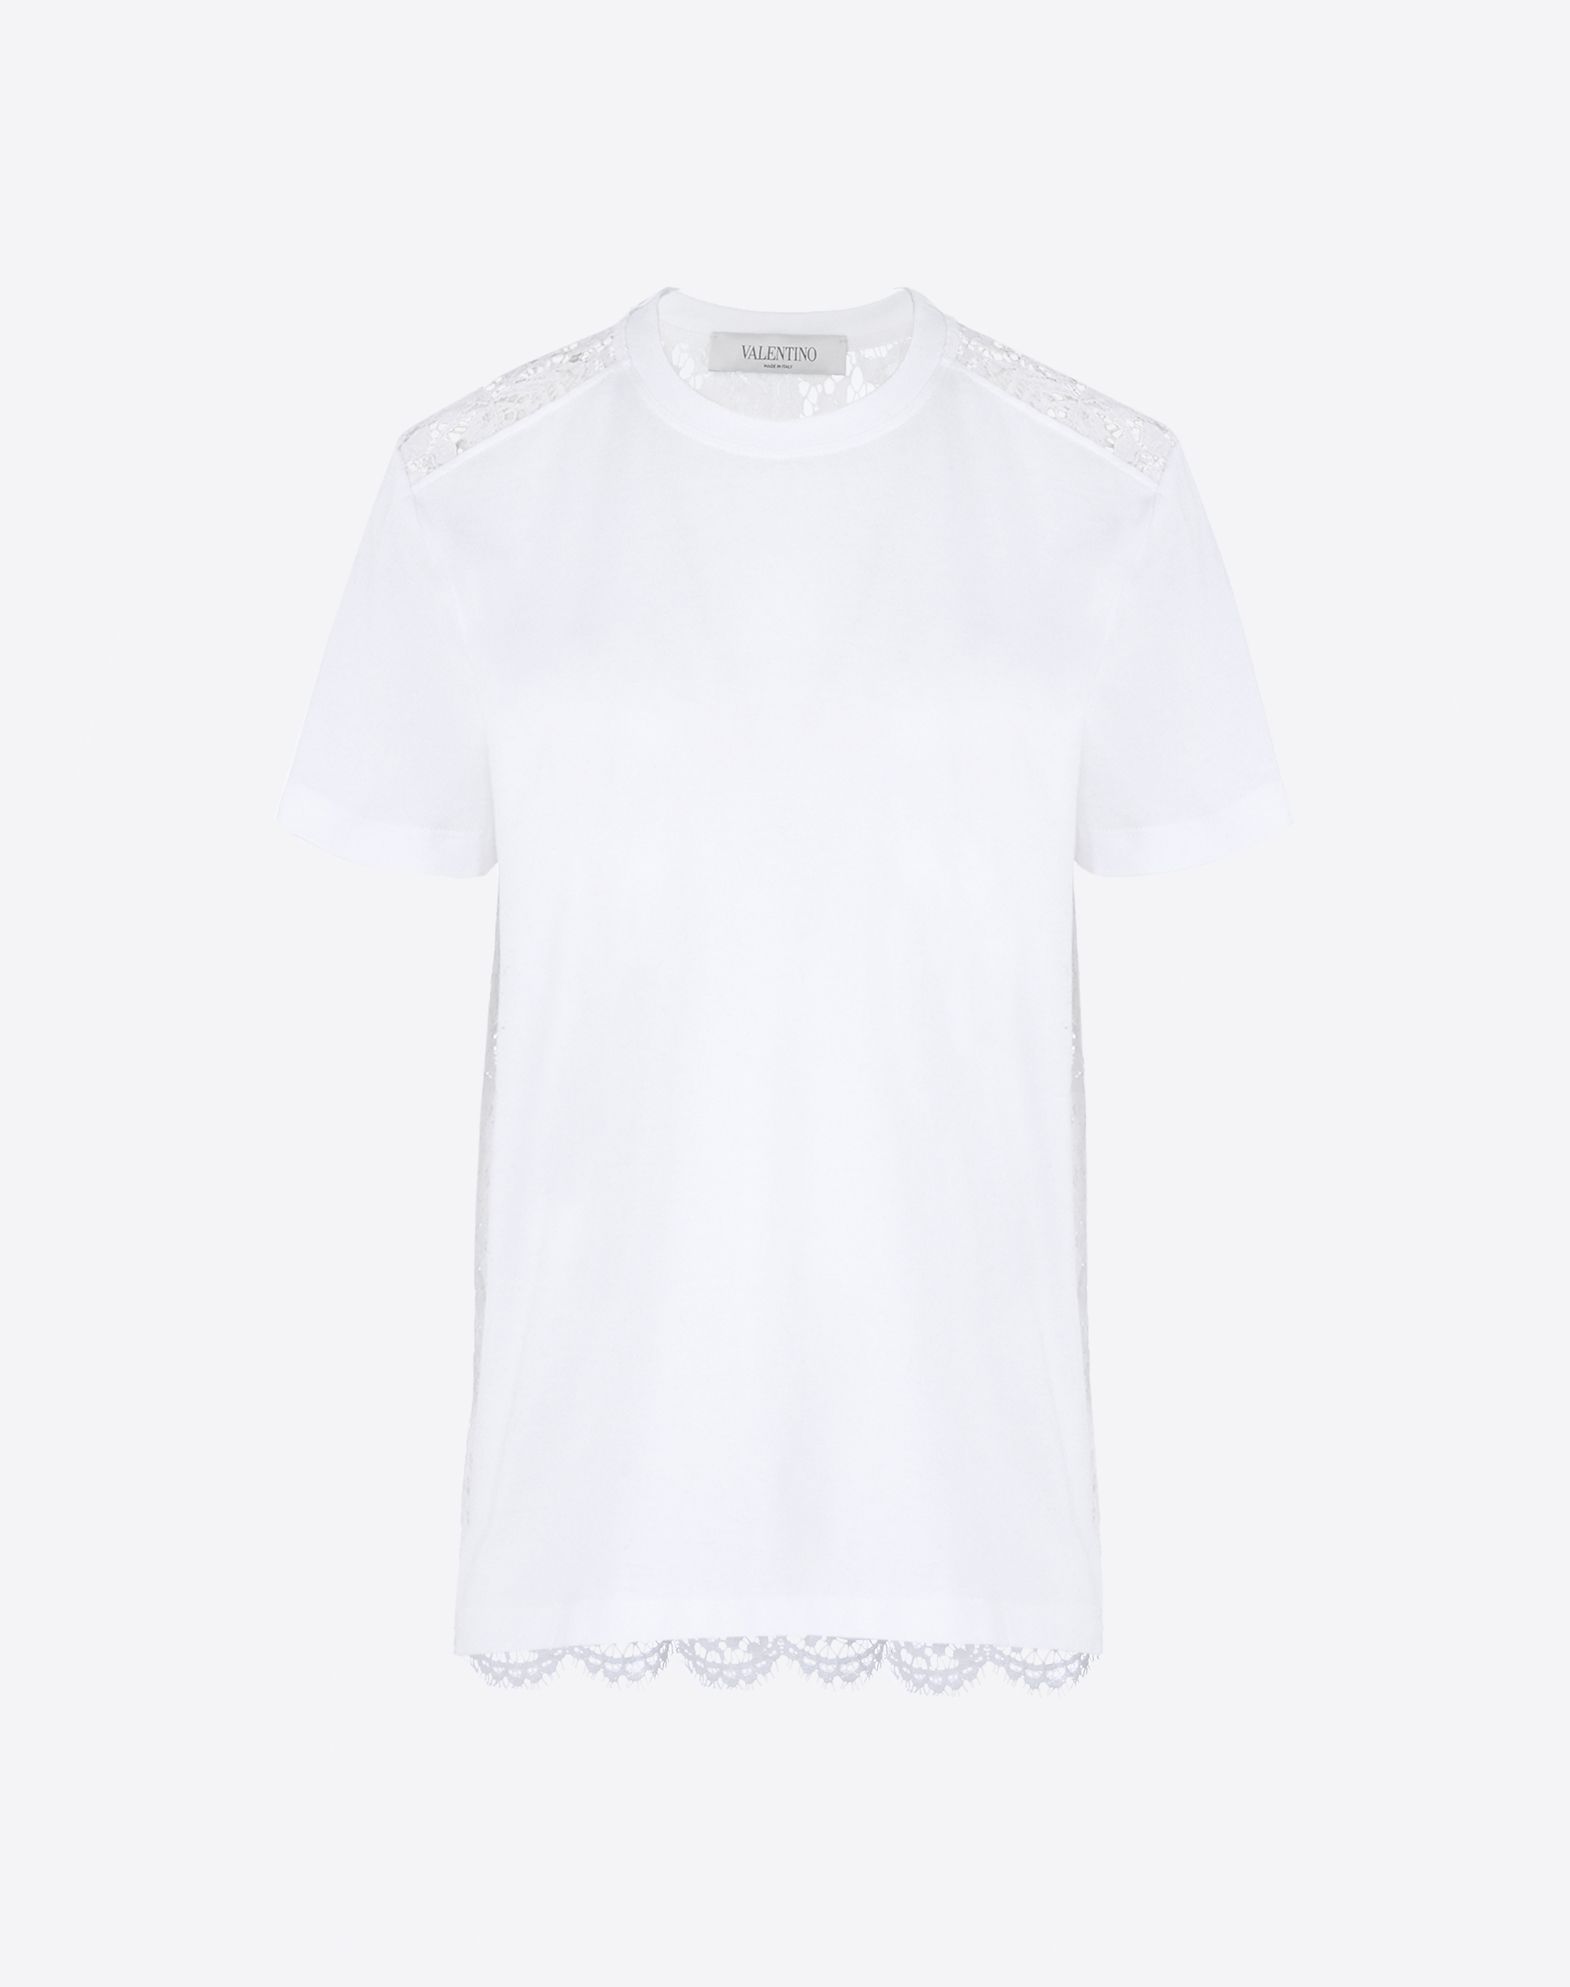 Valentino Cotton And Heavy Lace T Shirt, Knitwear Shirts And Tops for